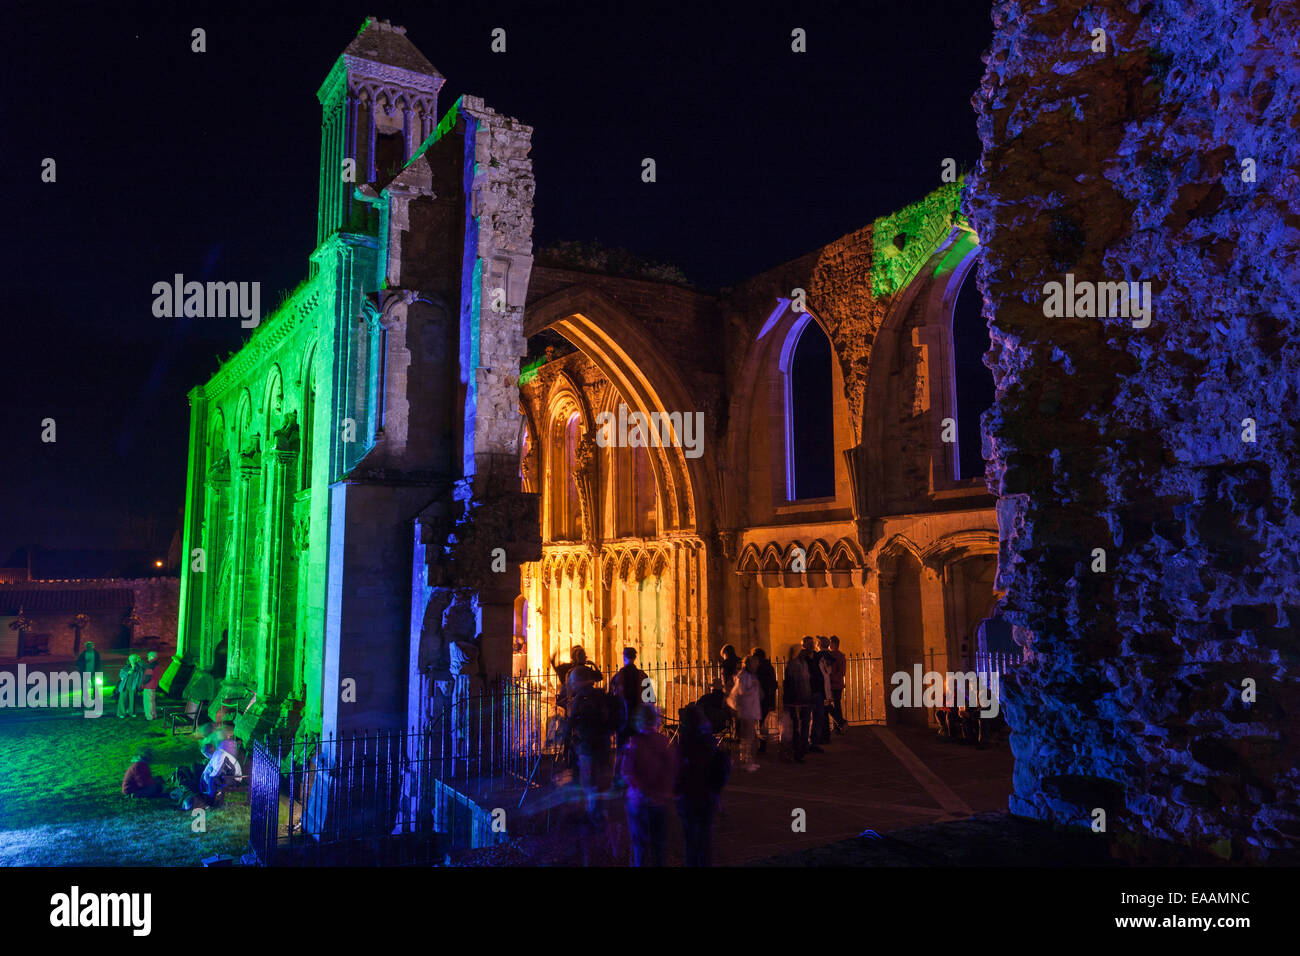 The ruins of the Lady Chapel in Glastonbury Abbey, Glastonbury, Somerset, at night Stock Photo